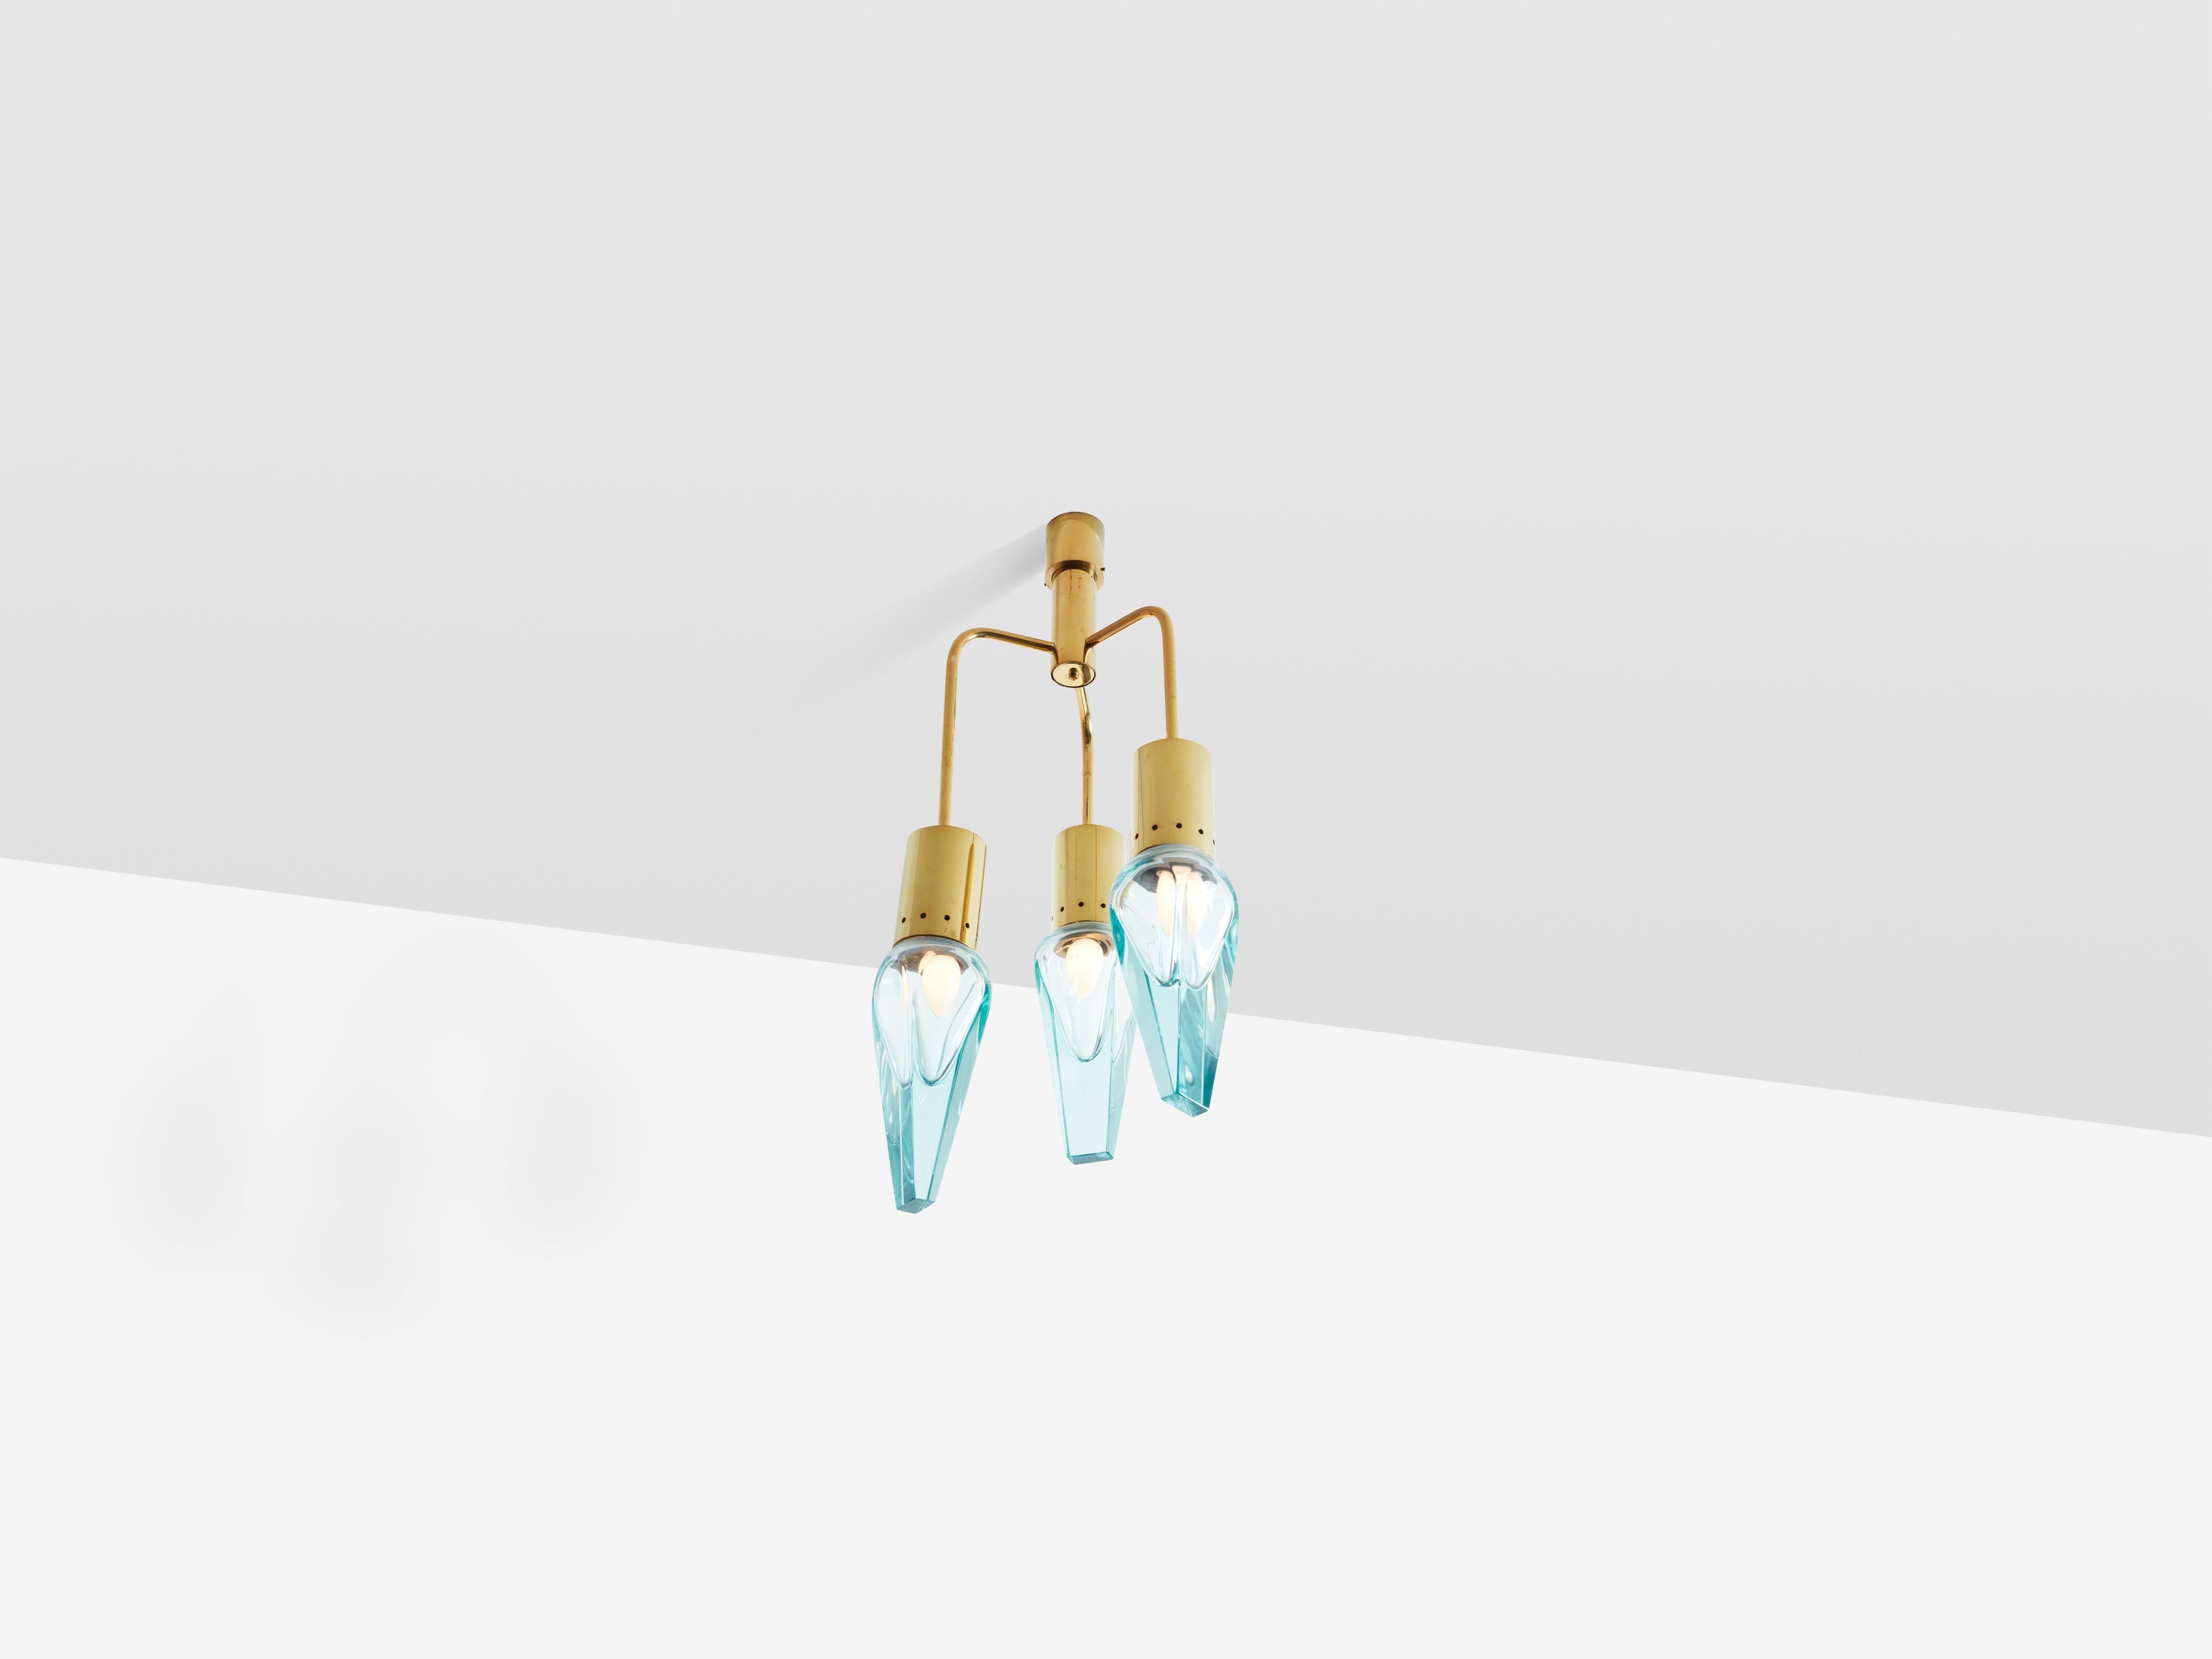 This Murano glass and brass chandelier was designed by Flavio Poli for Seguso in the 1950s. Featuring three conical luminaires, it beautifully showcases the Sommerso glass technique, where layers of different materials overlap, creating a variety of